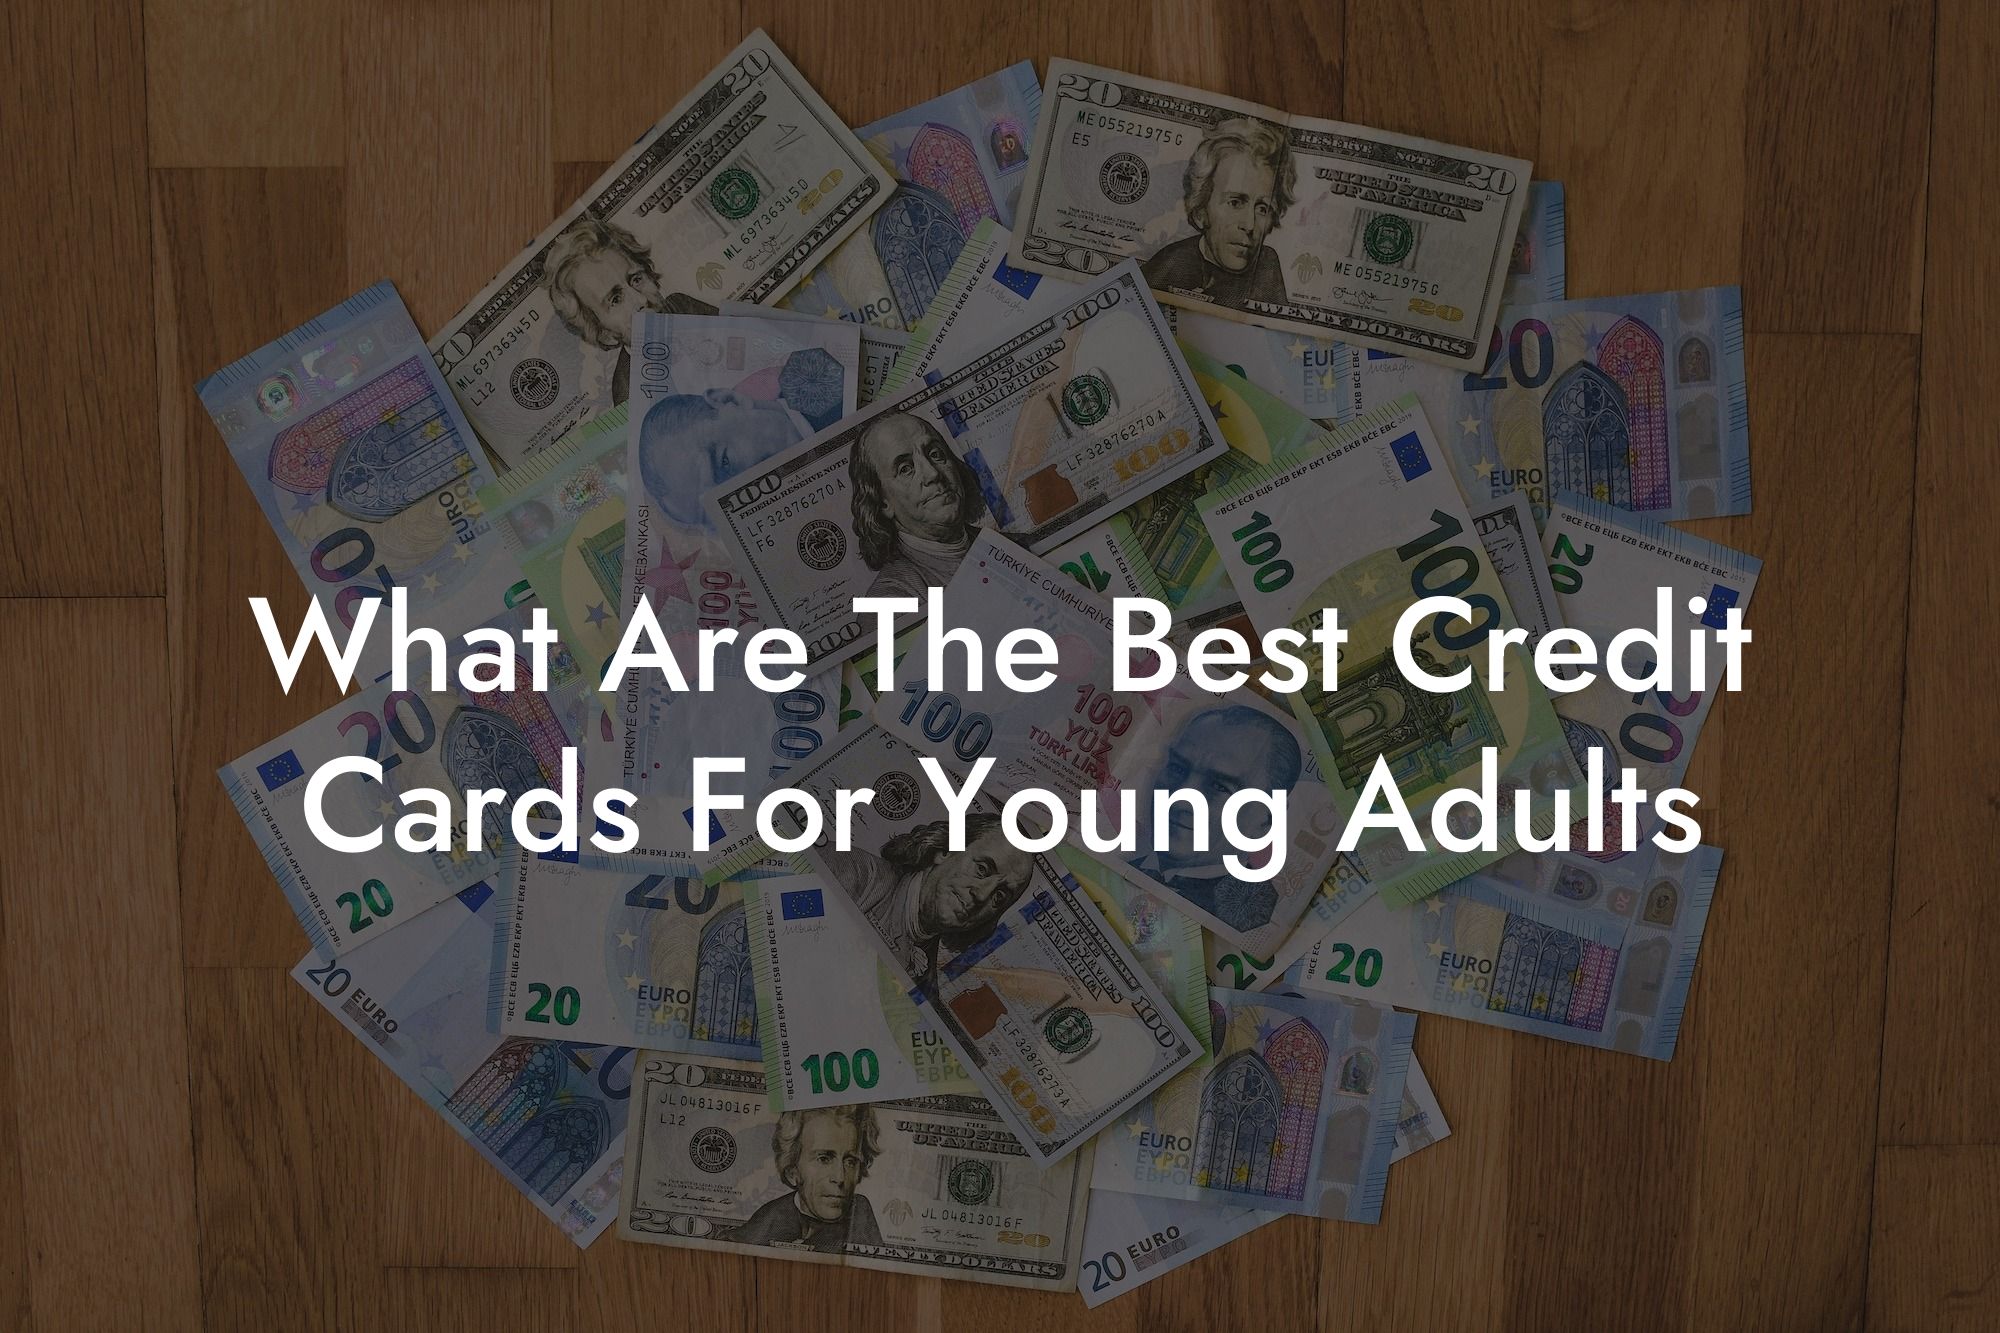 What Are The Best Credit Cards For Young Adults